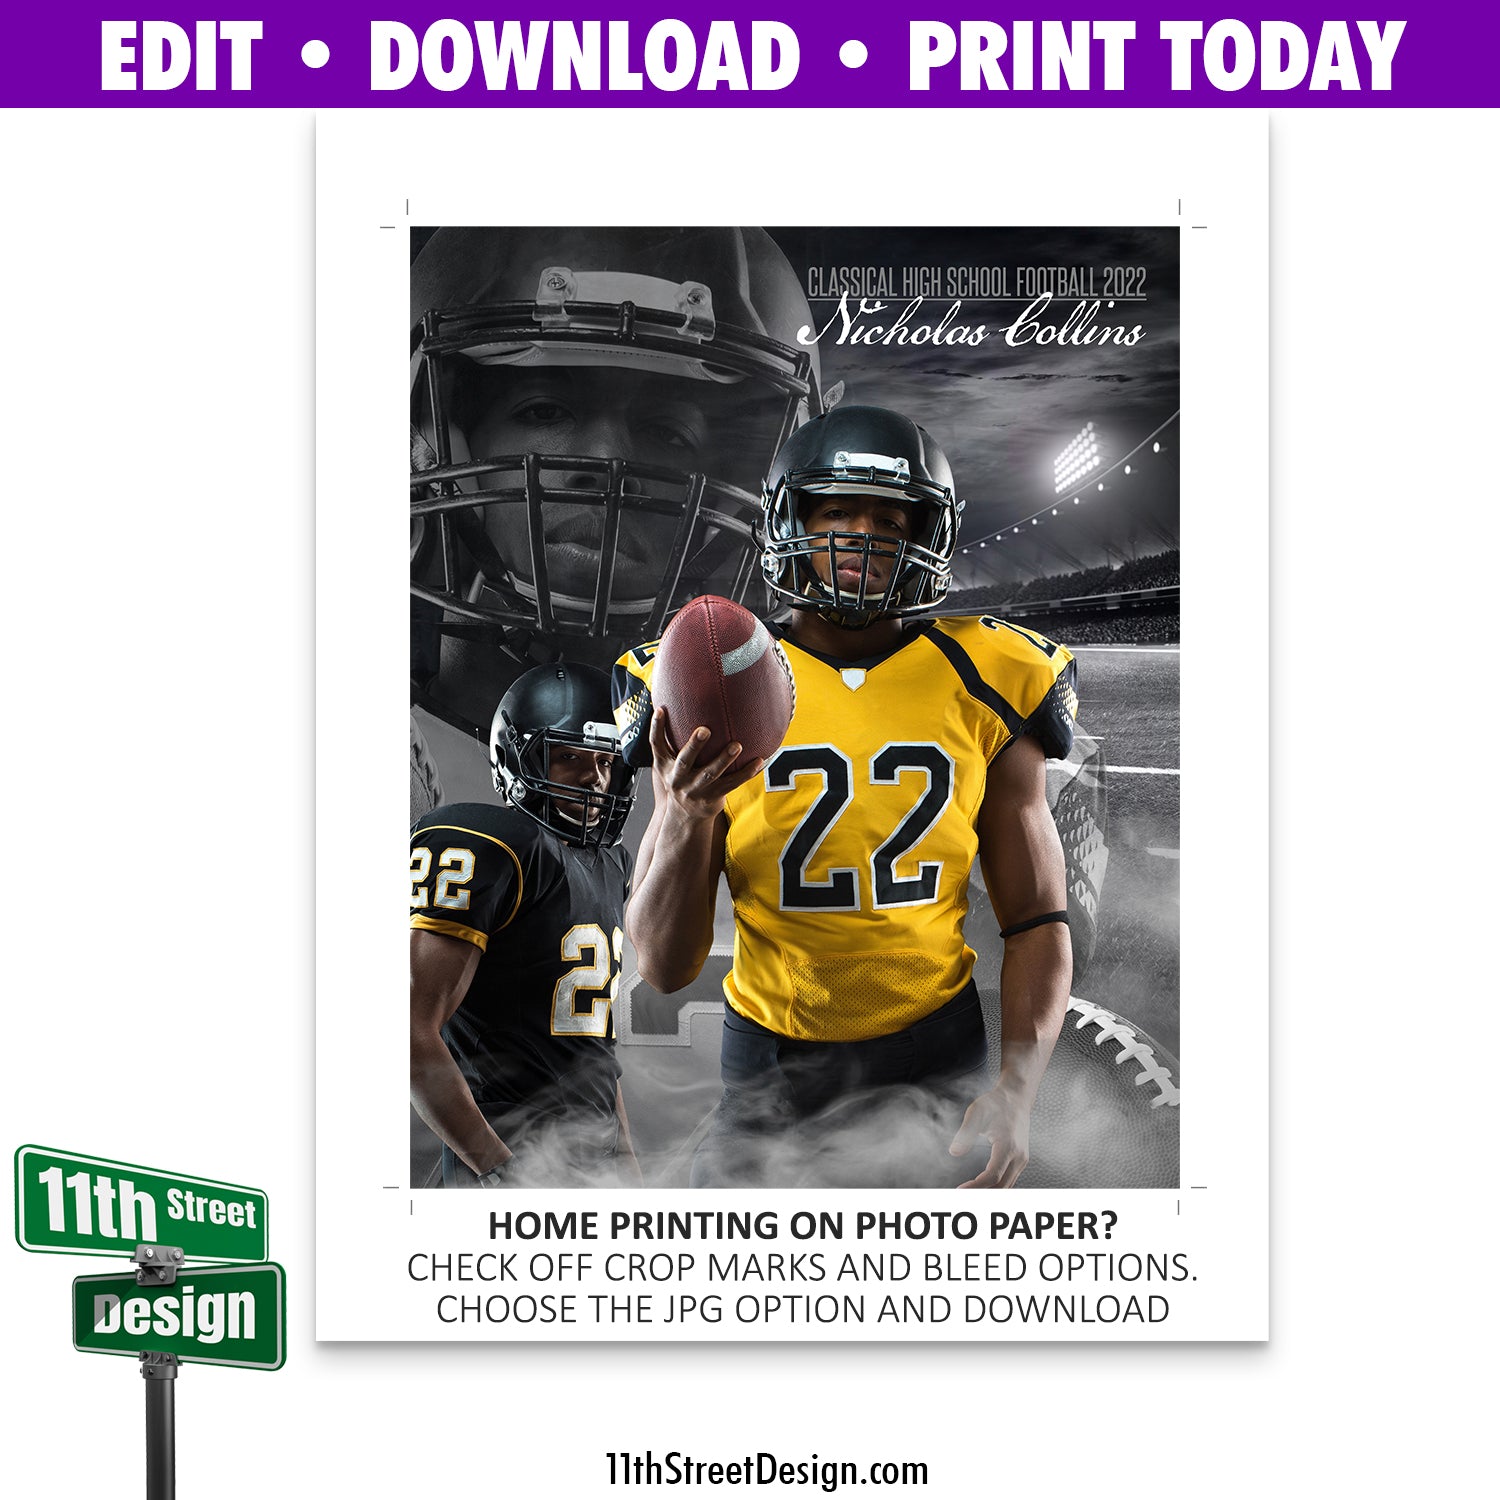 Sports Poster • Edit Now Online • Print Today • Digital Download